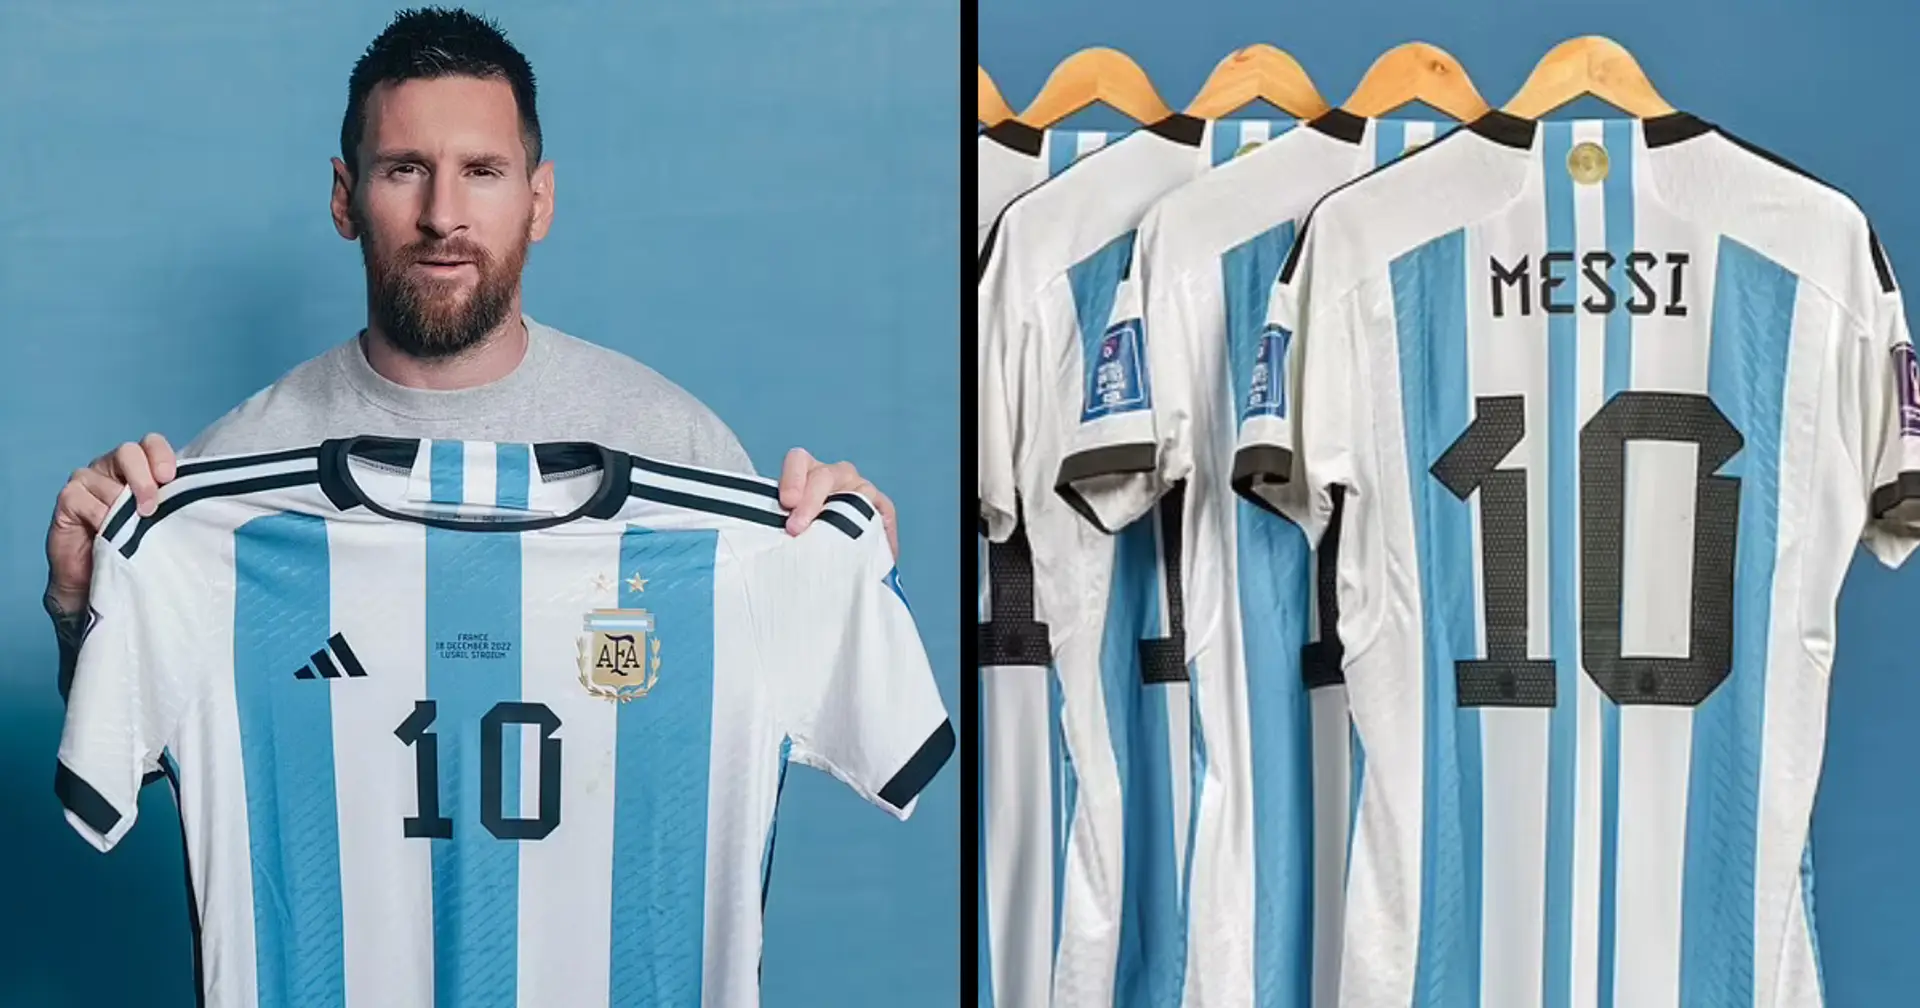 Messi set to smash world record by selling his jerseys